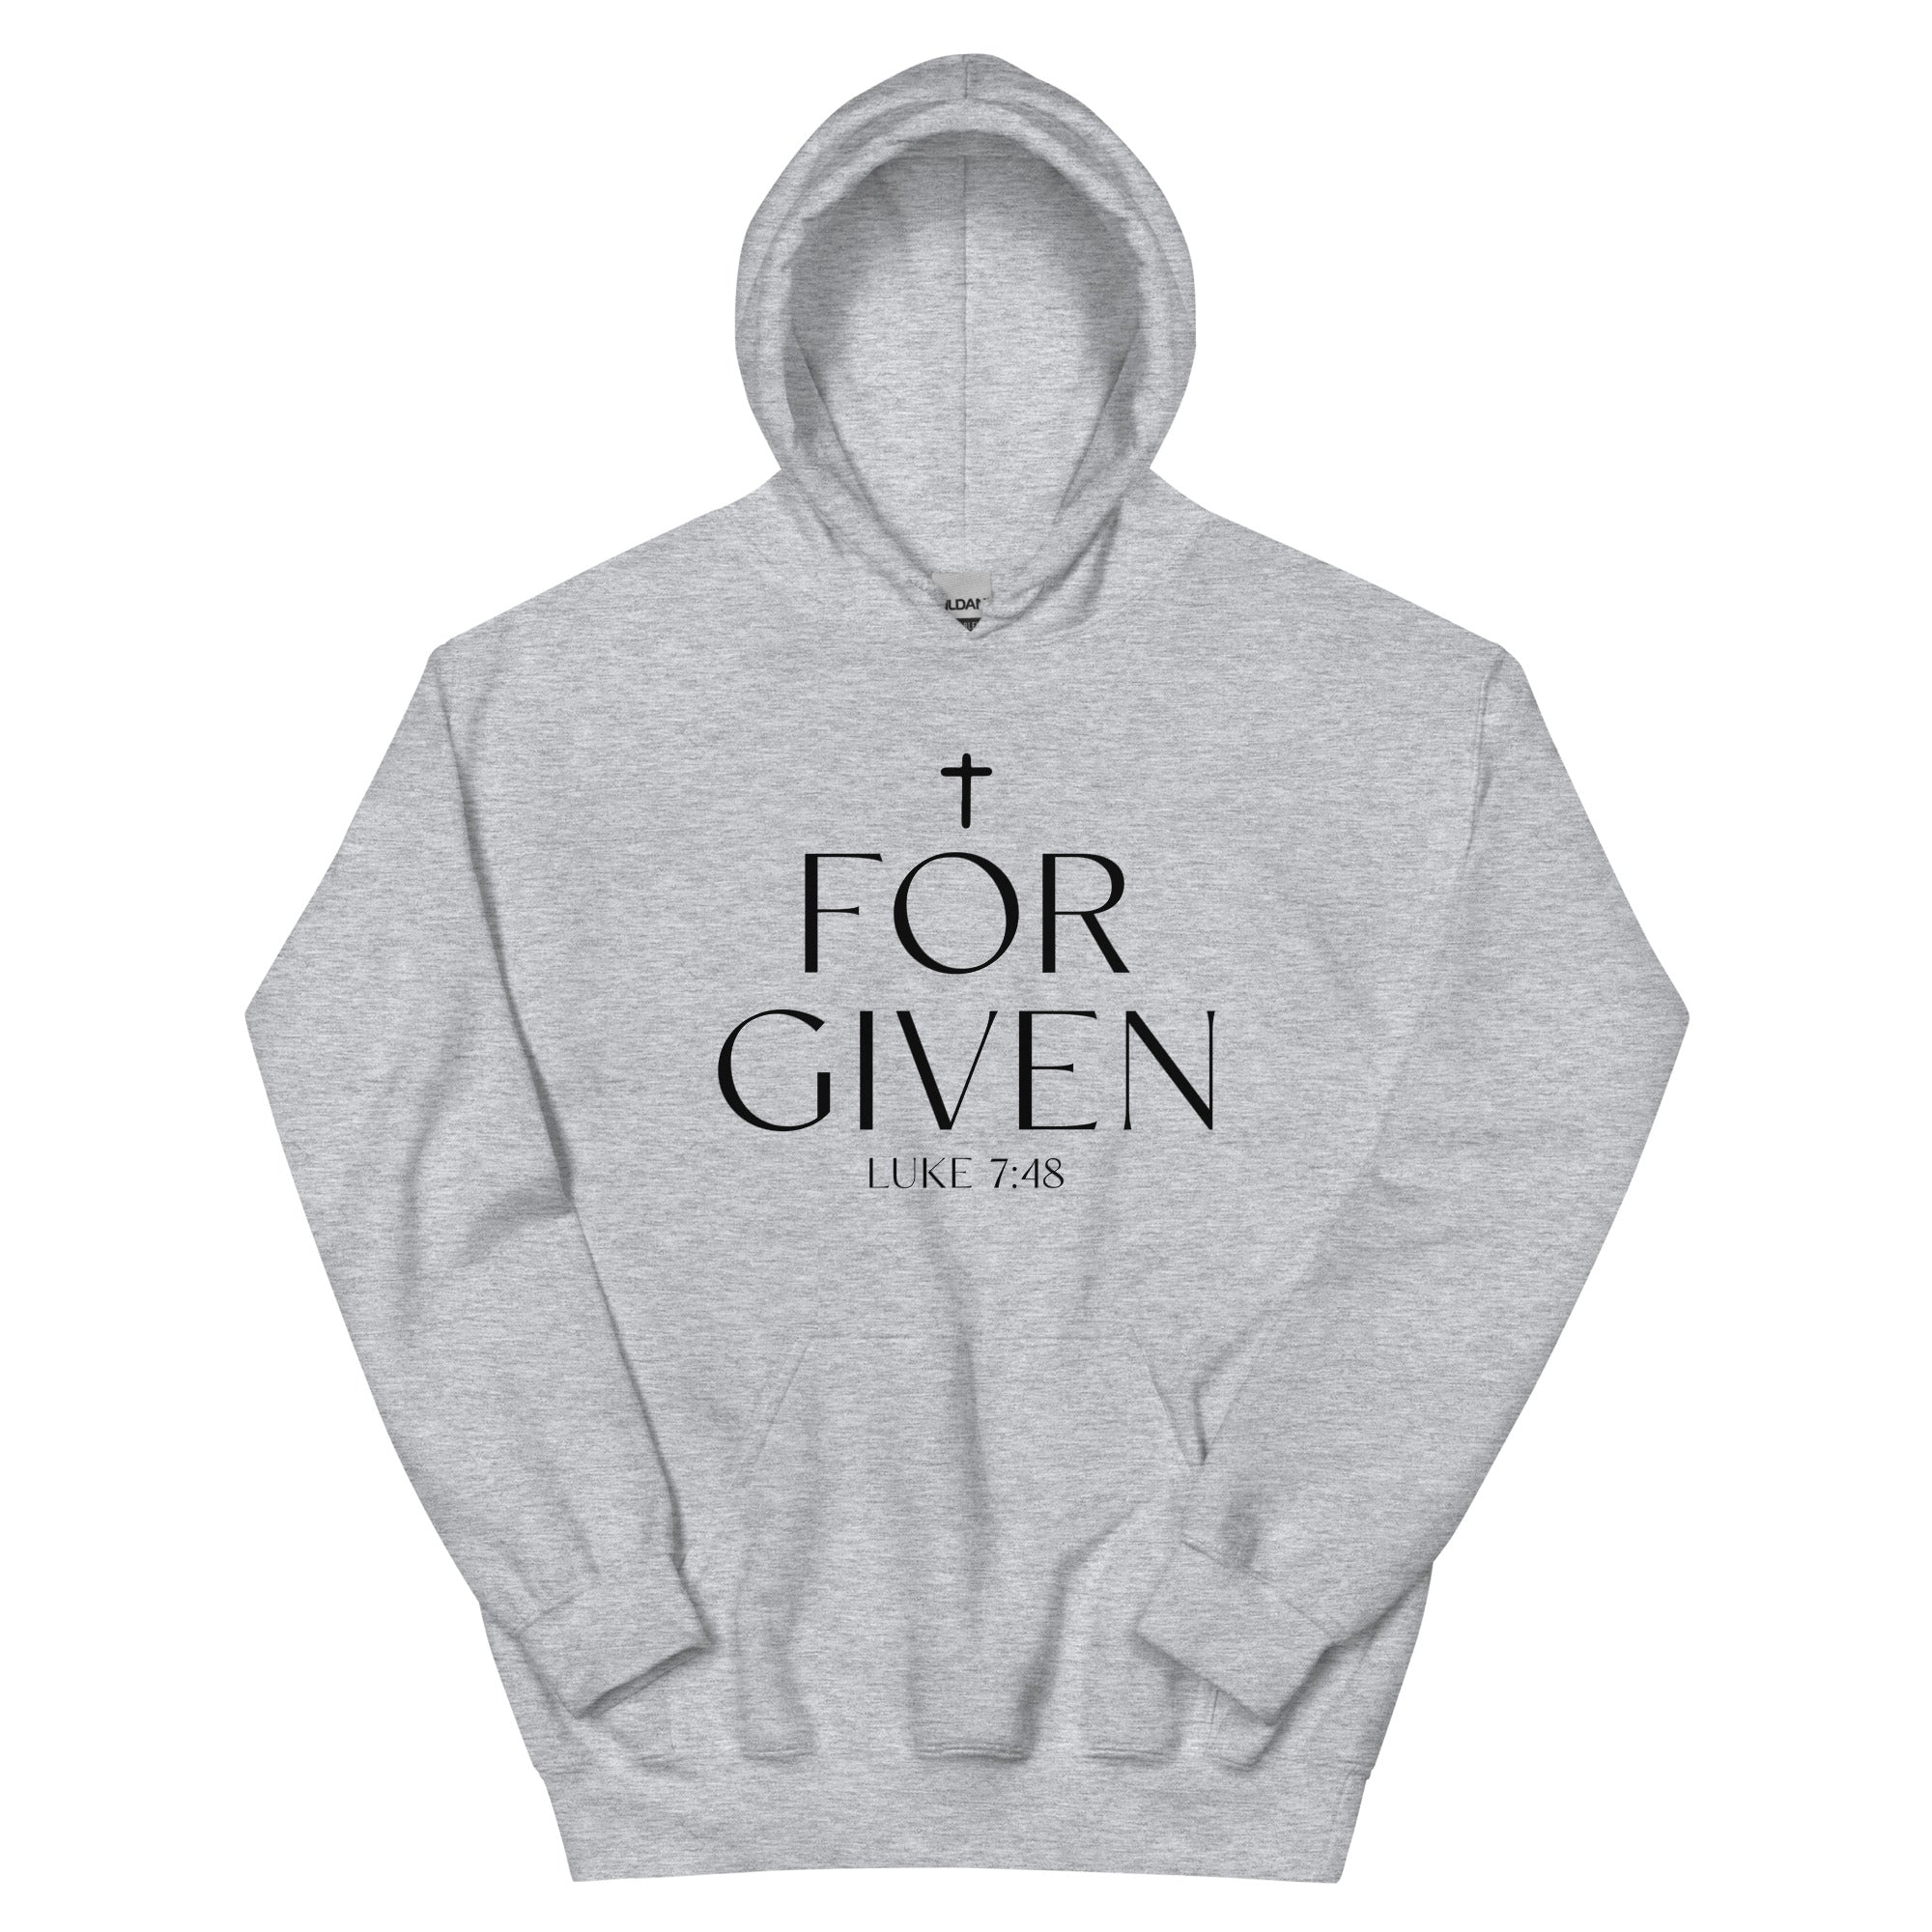 Forgiven - Unisex Hoodie